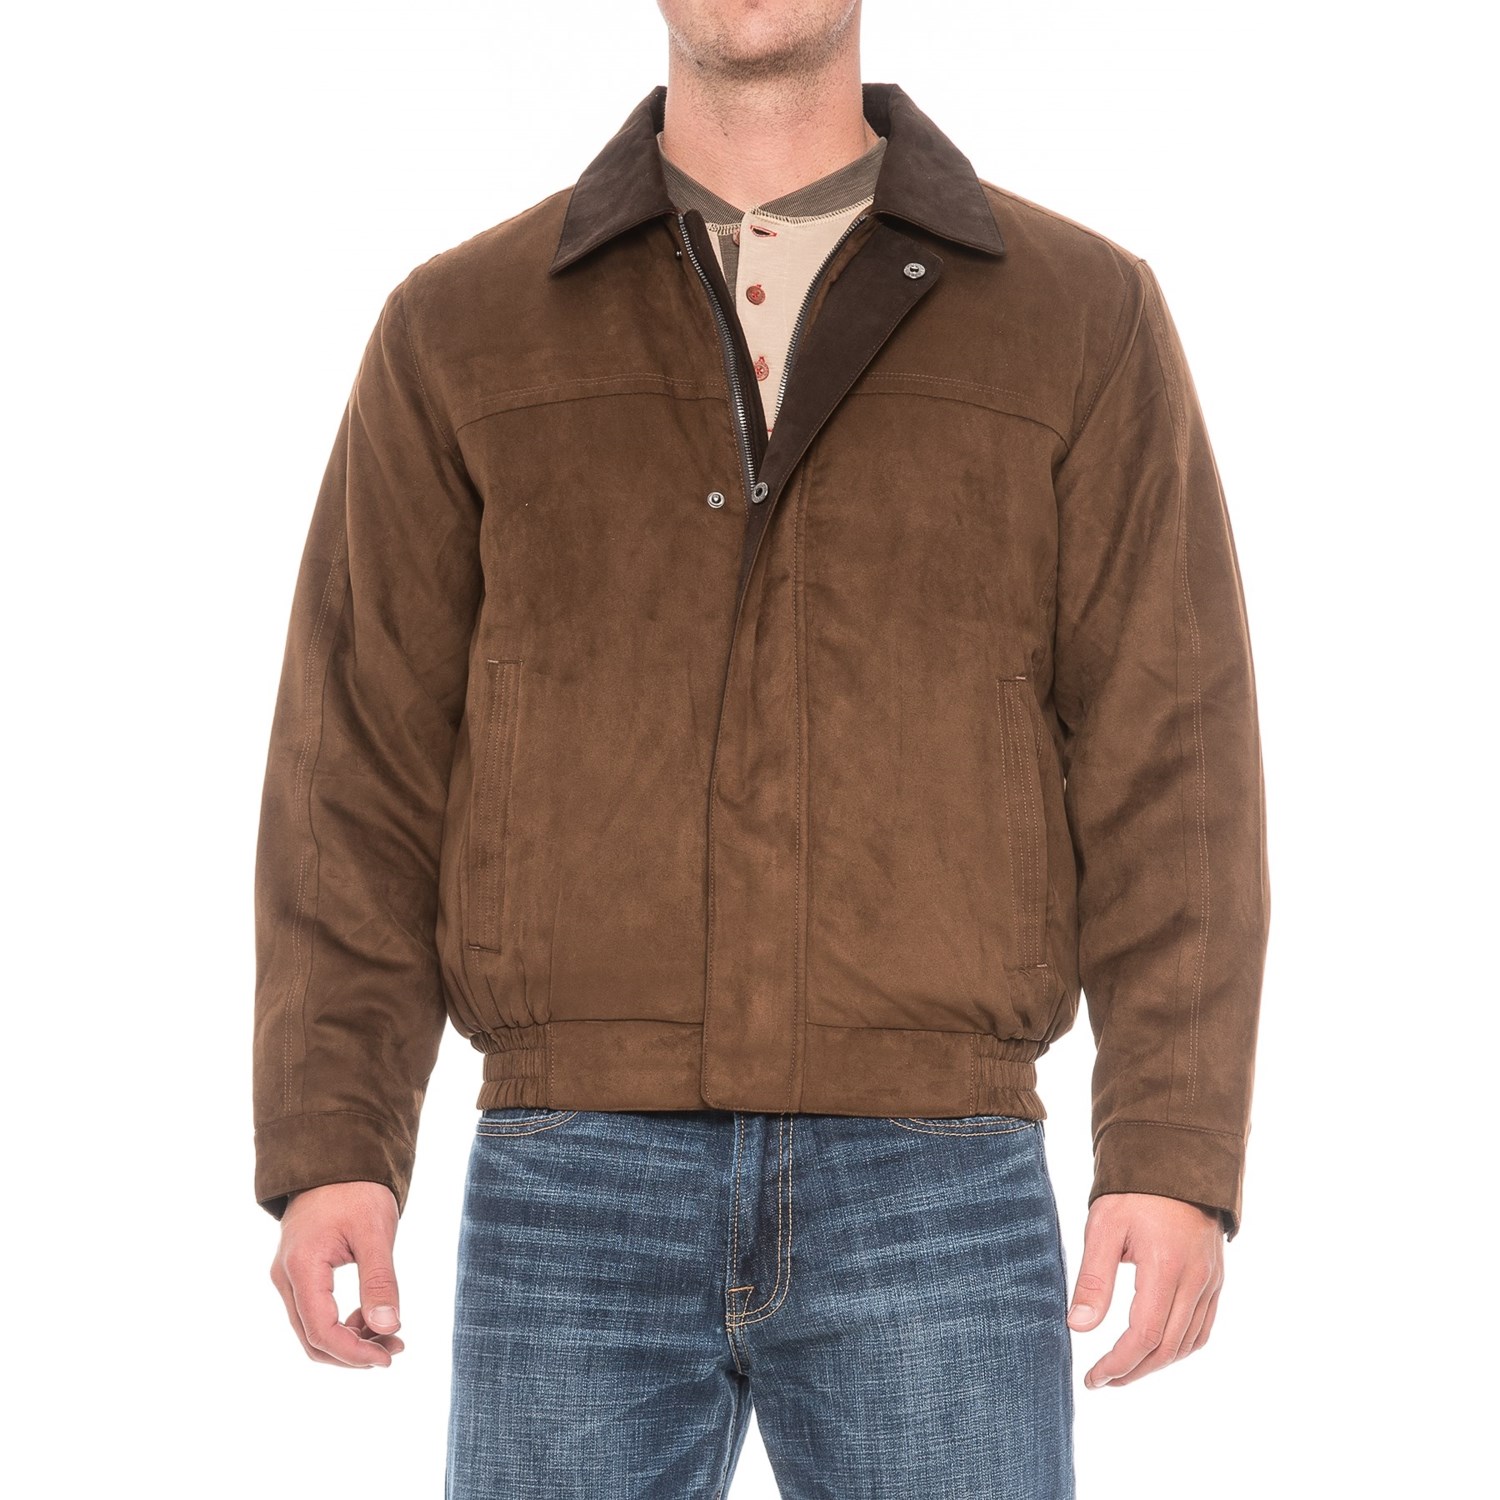 Weatherproof Microsuede Polyfill Bomber Jacket (For Men) - Save 66%